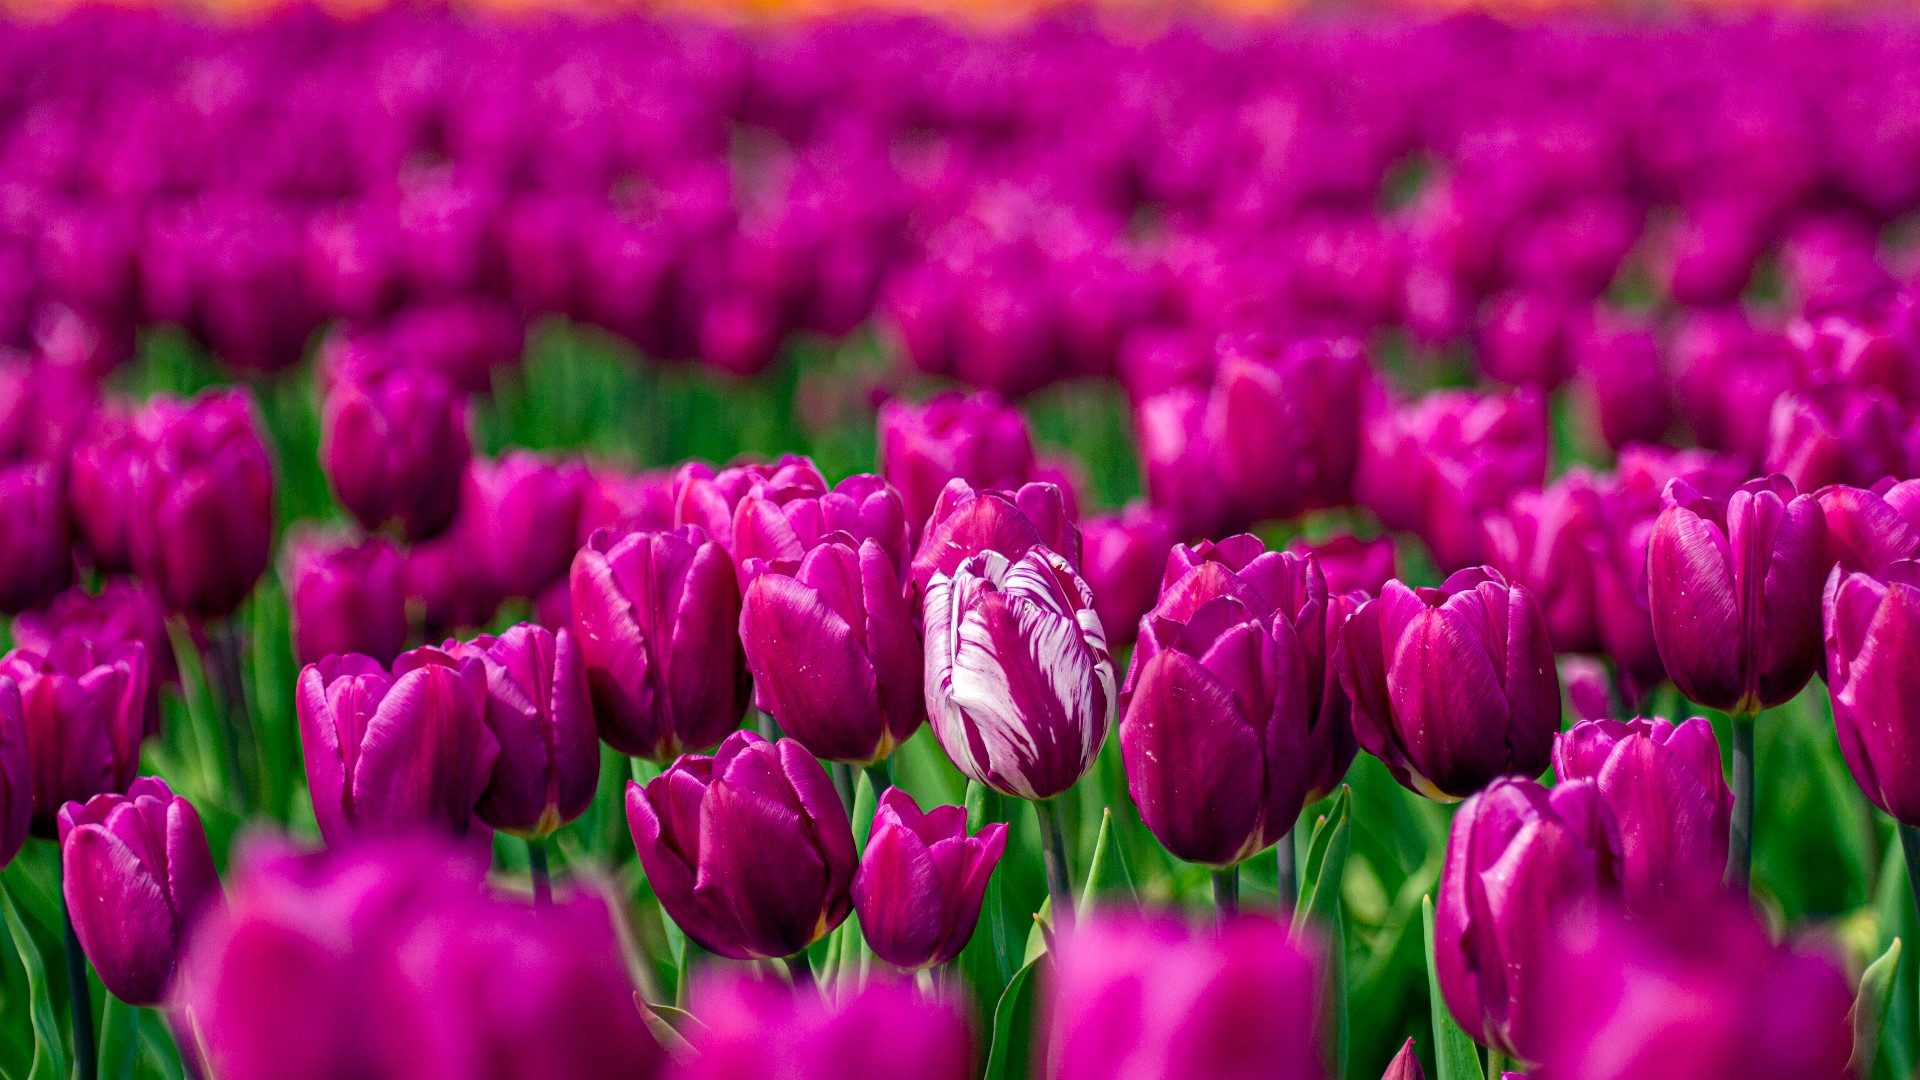 What to know before visiting the Skagit Valley Tulip Festival | king5.com